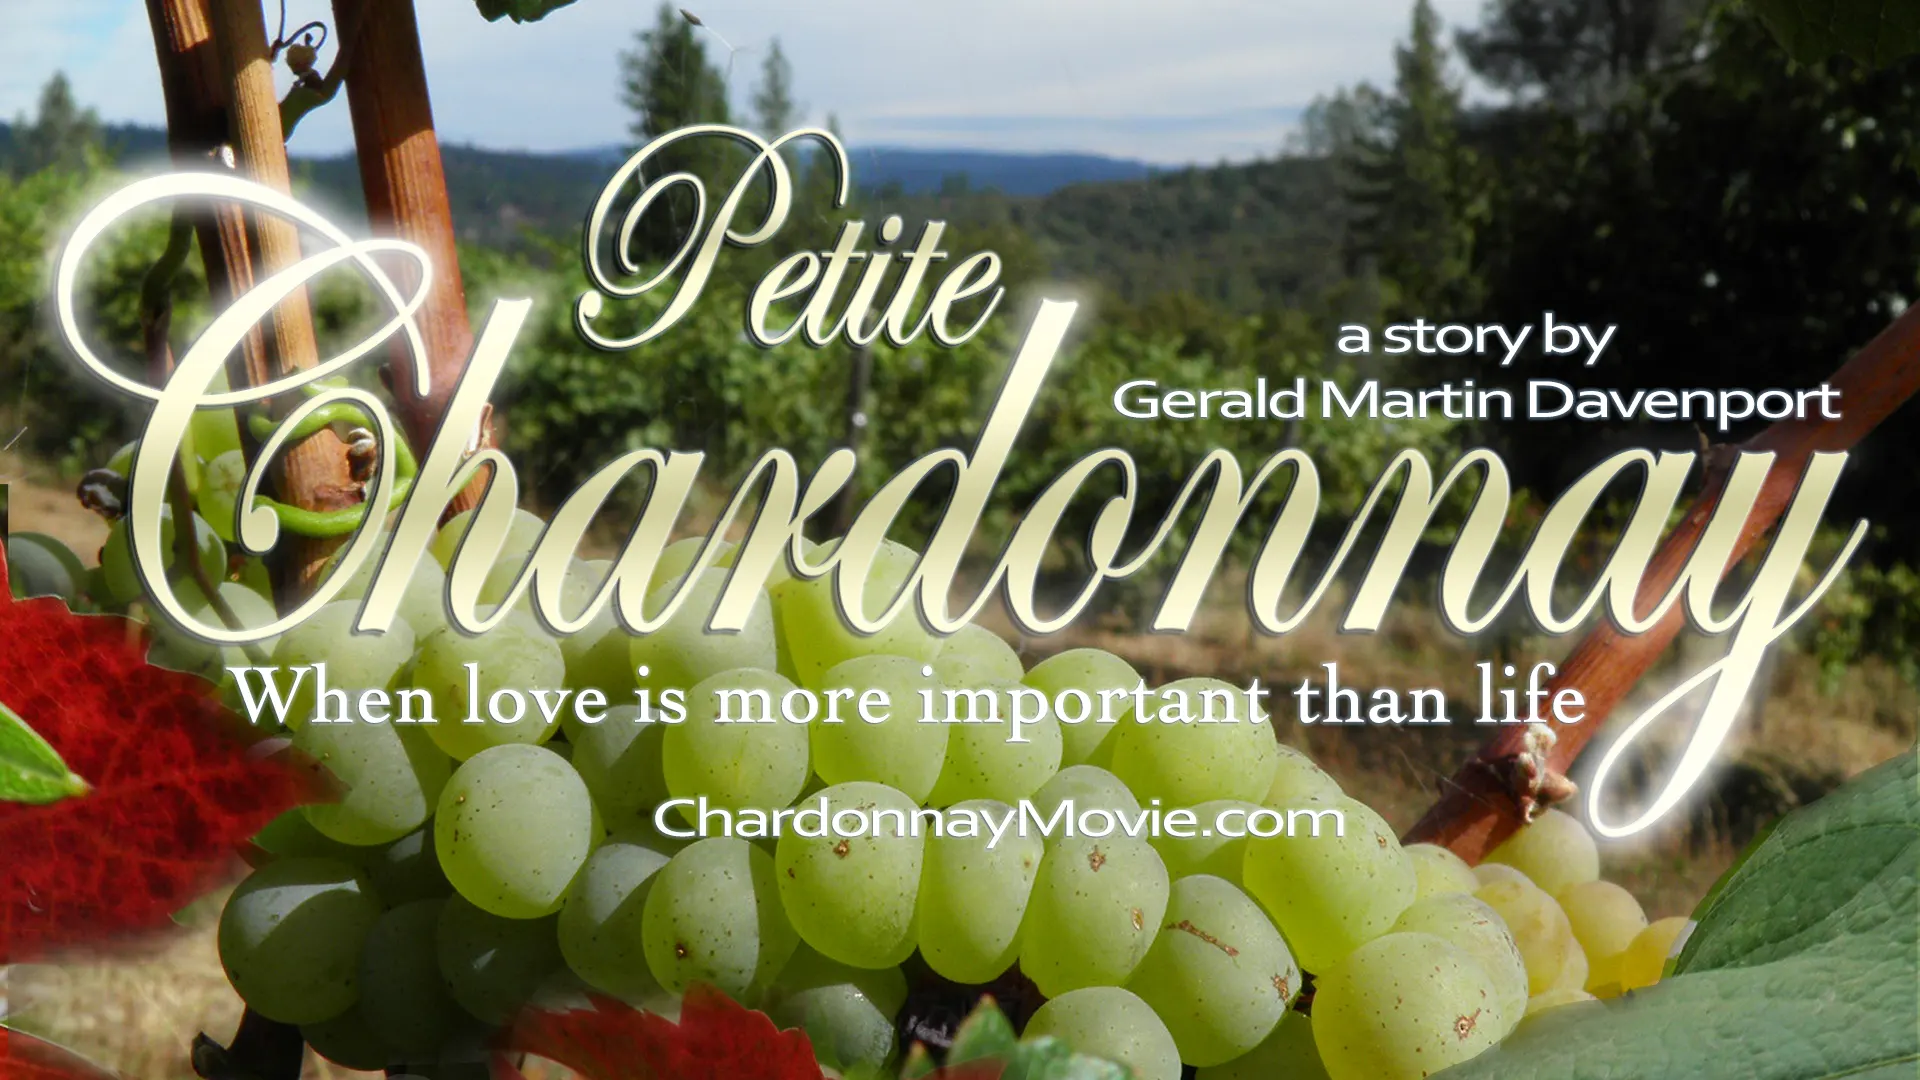 chardonnay grapes with vineyard in background with text Petite Chardonnay a story by Gerald Martin Davenport.